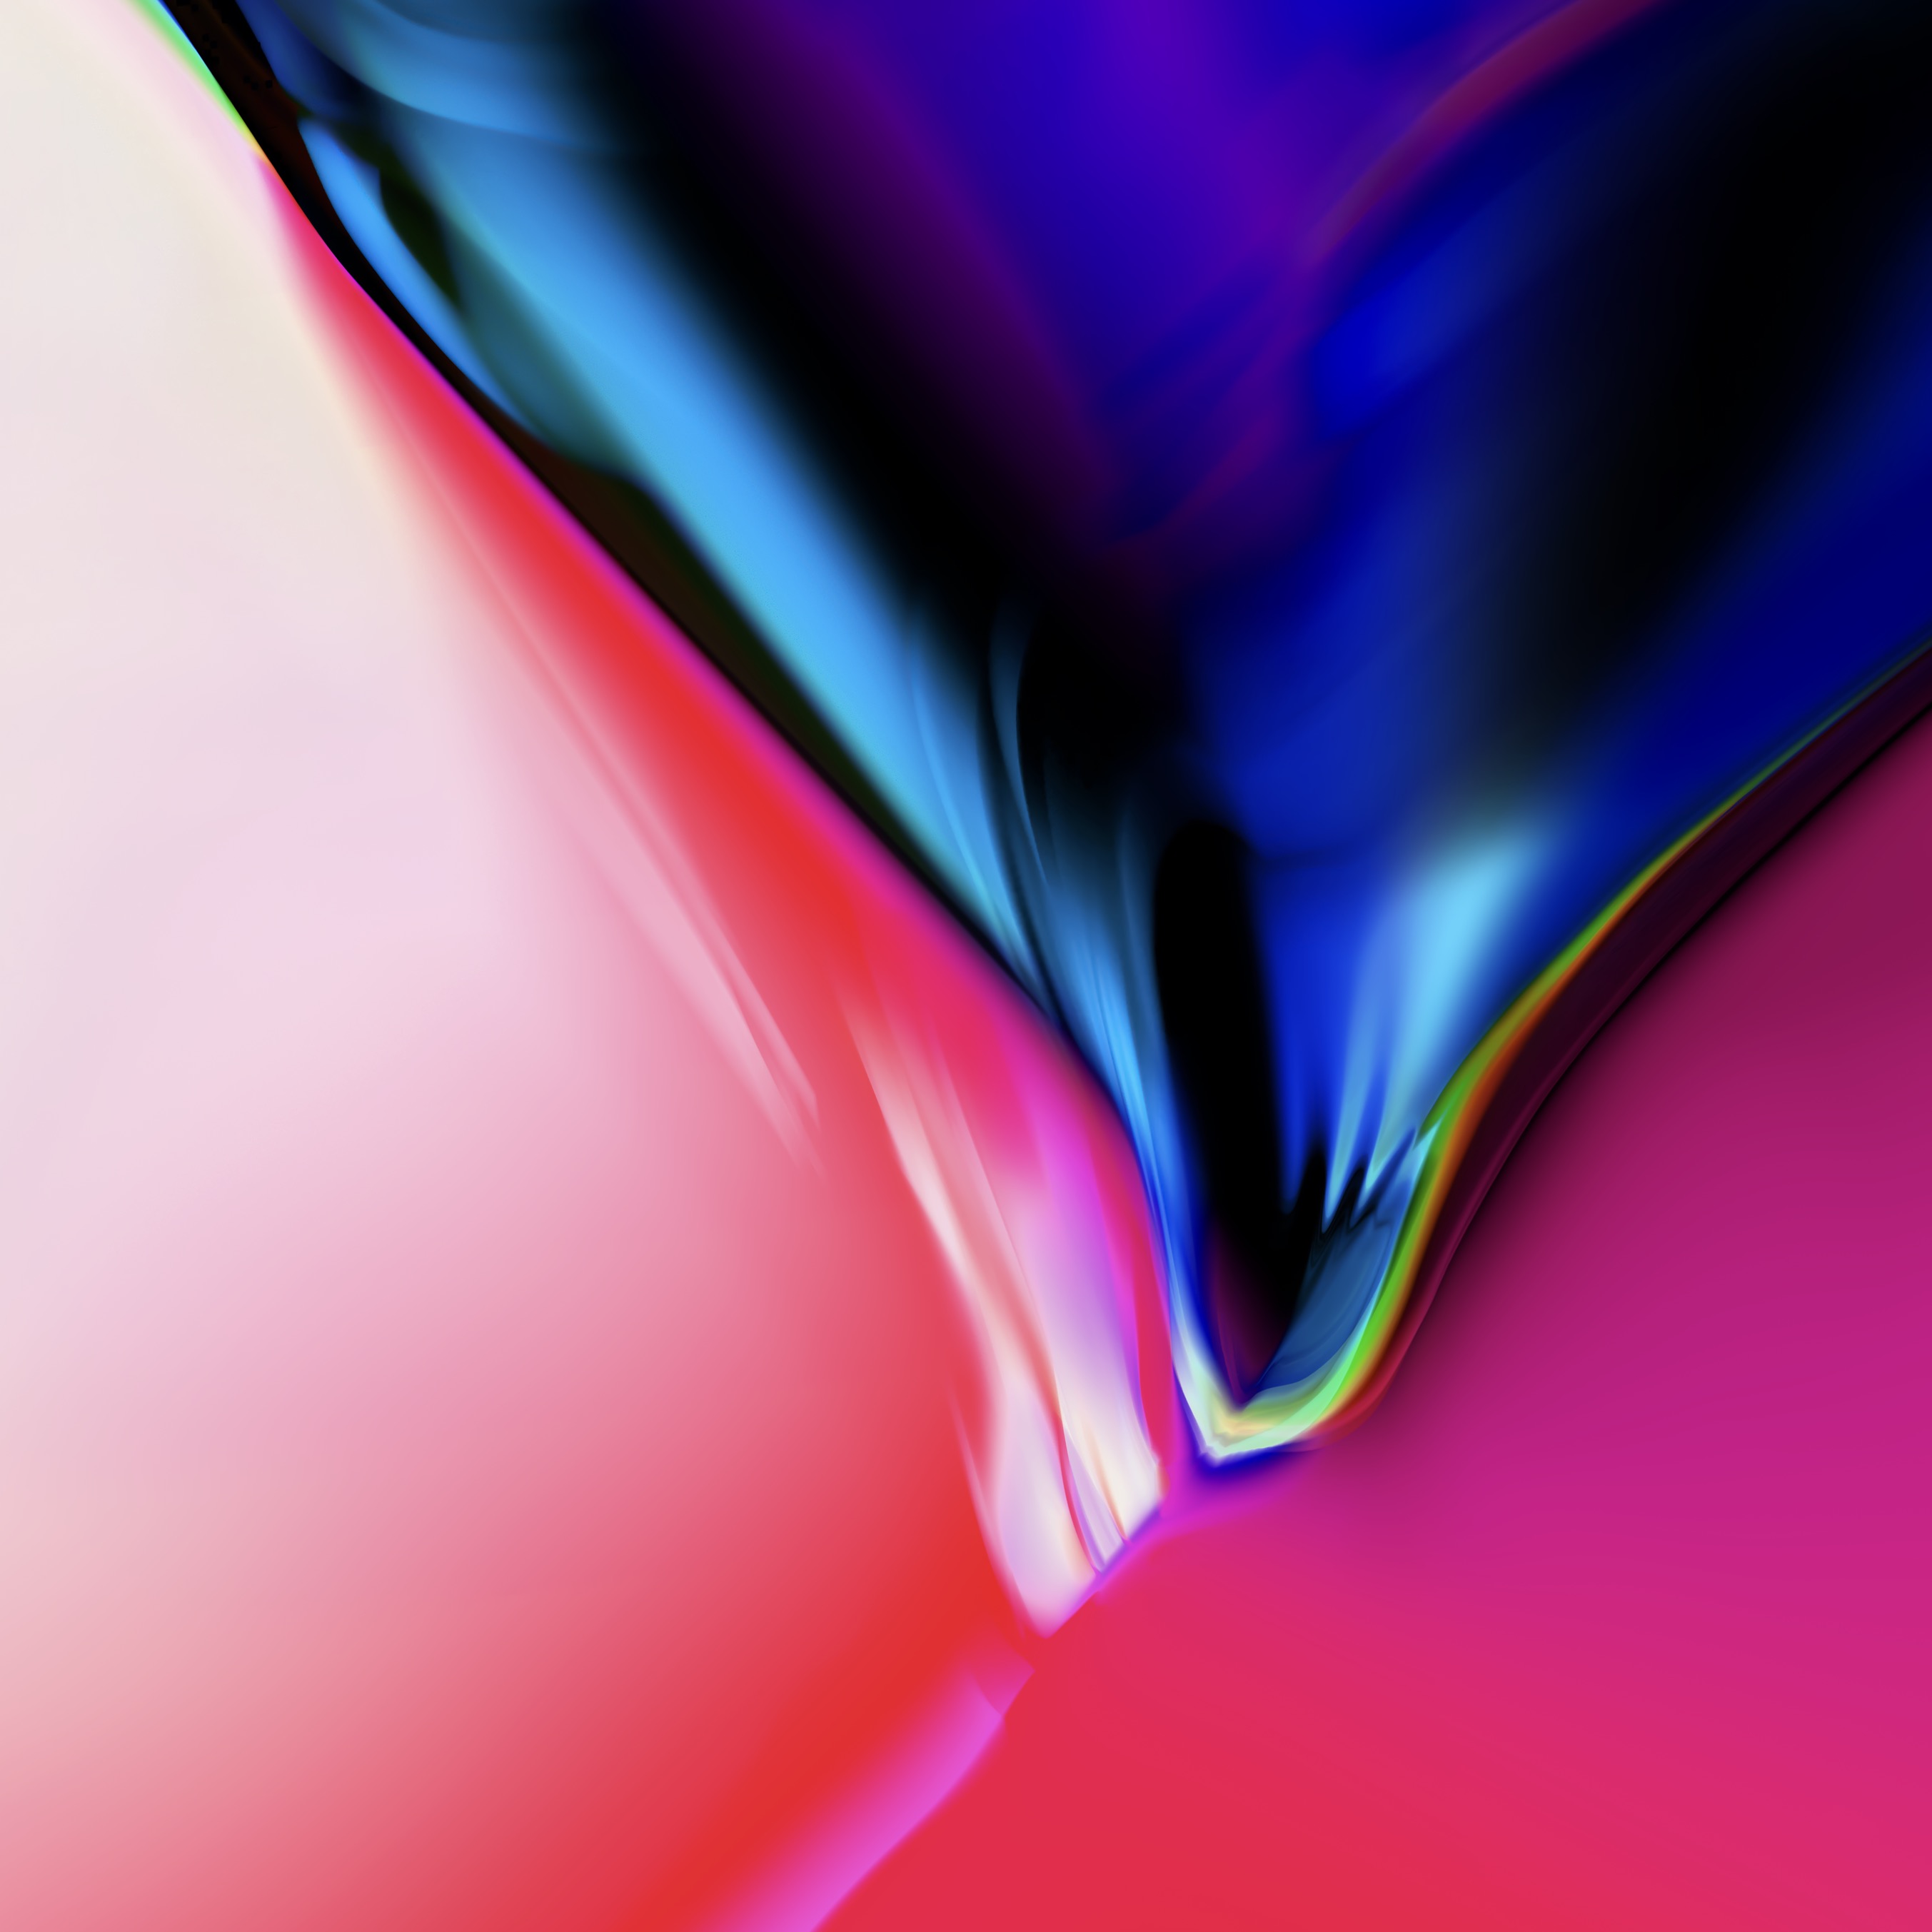 New Iphone Wallpapers